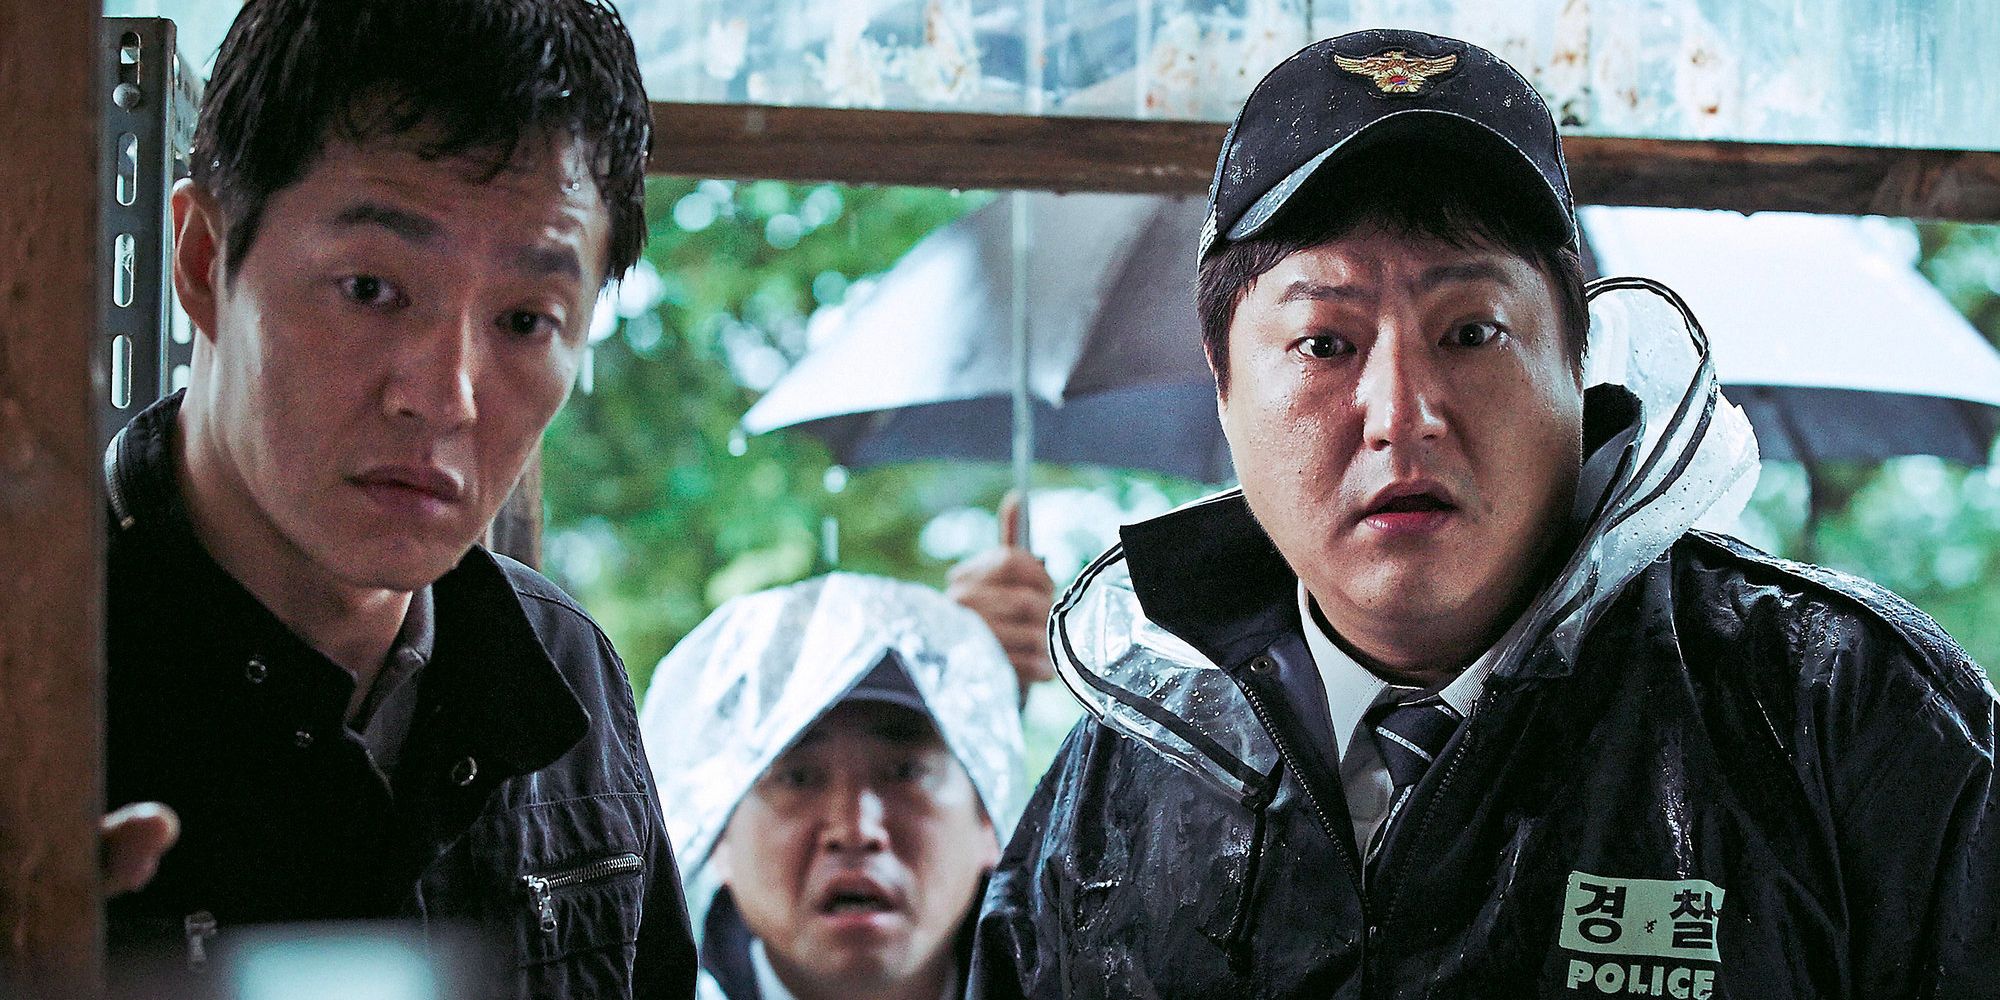 Kwak Do-won and Jo Han-chul standing with shocked looks on their faces in The Wailing